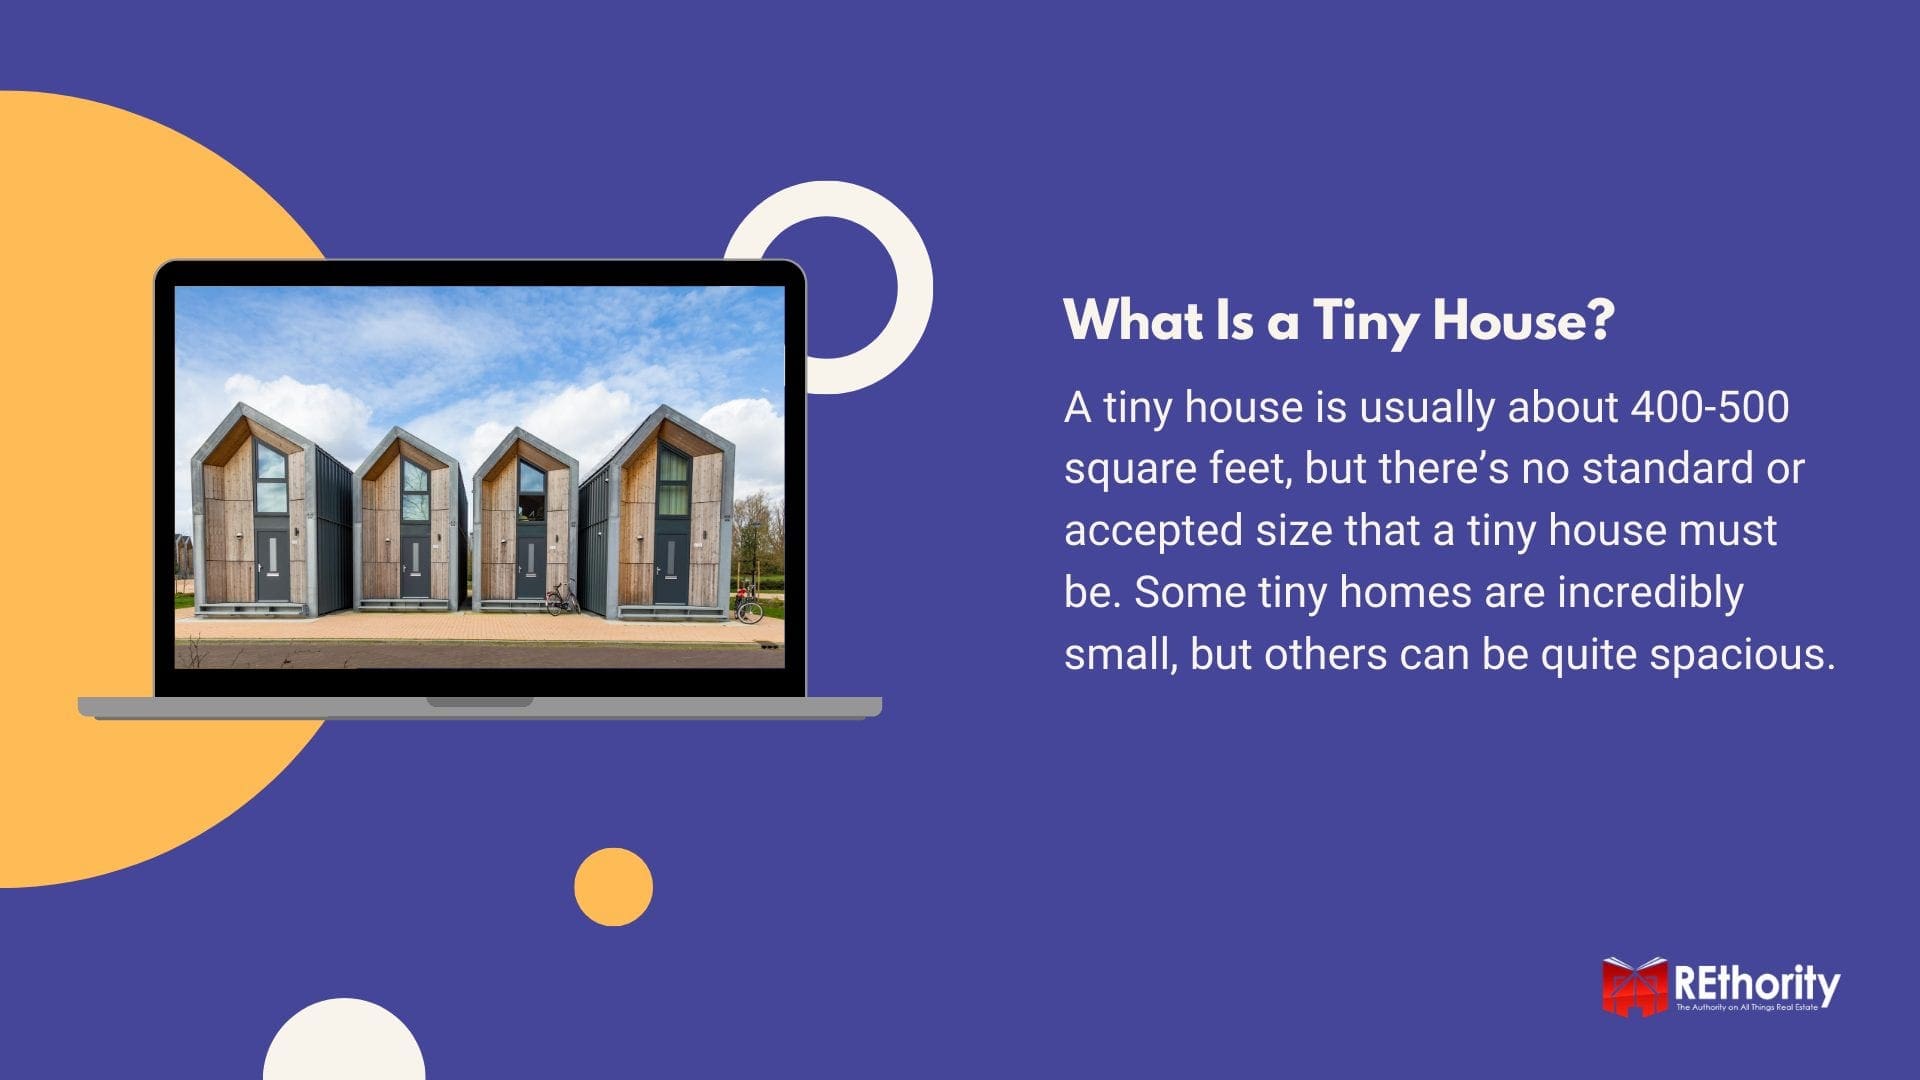 What Is a Tiny House graphic explaining what this concept is and how sizes vary